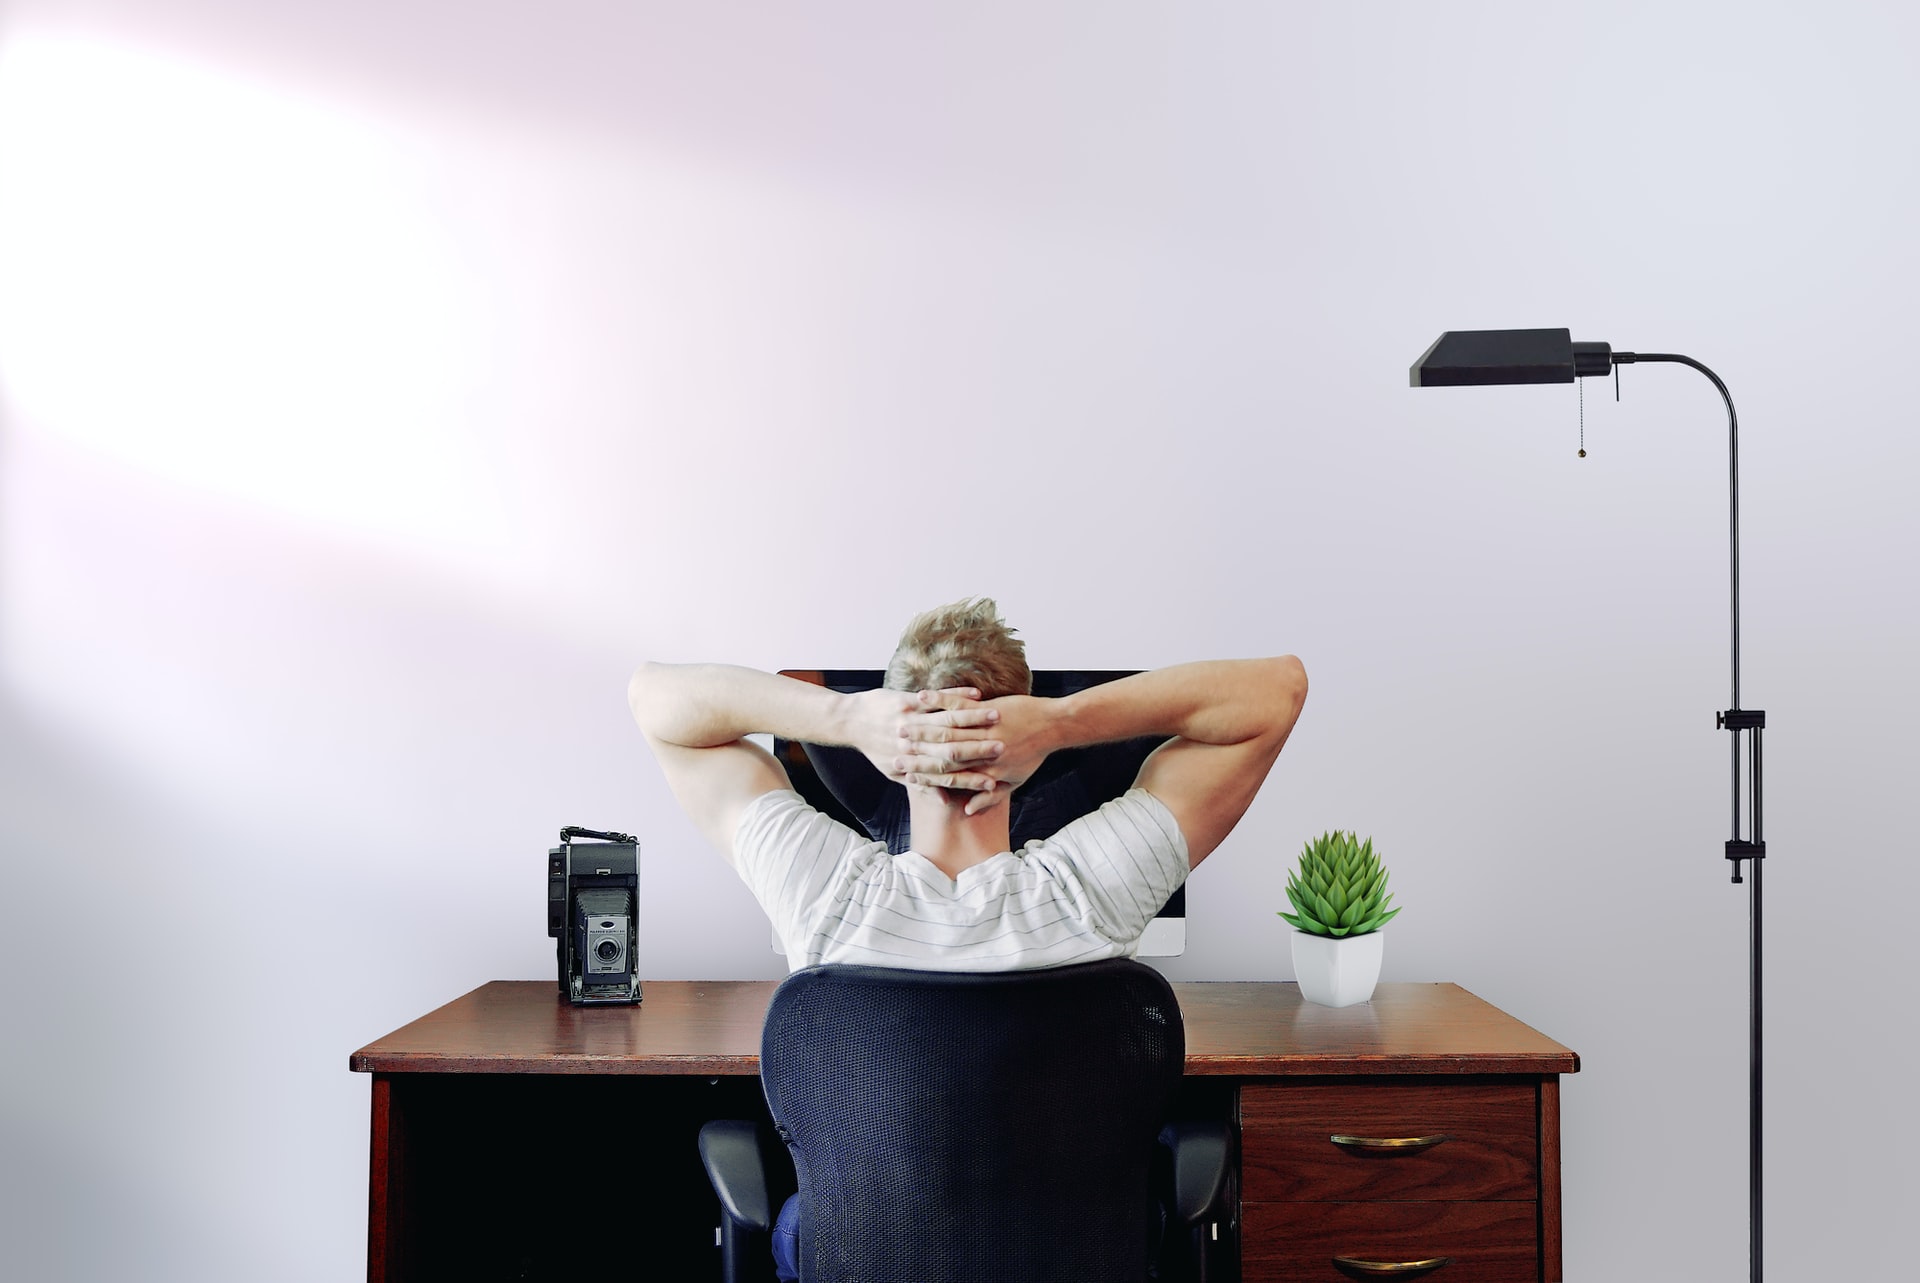 Man holding his head while sitting on a chair